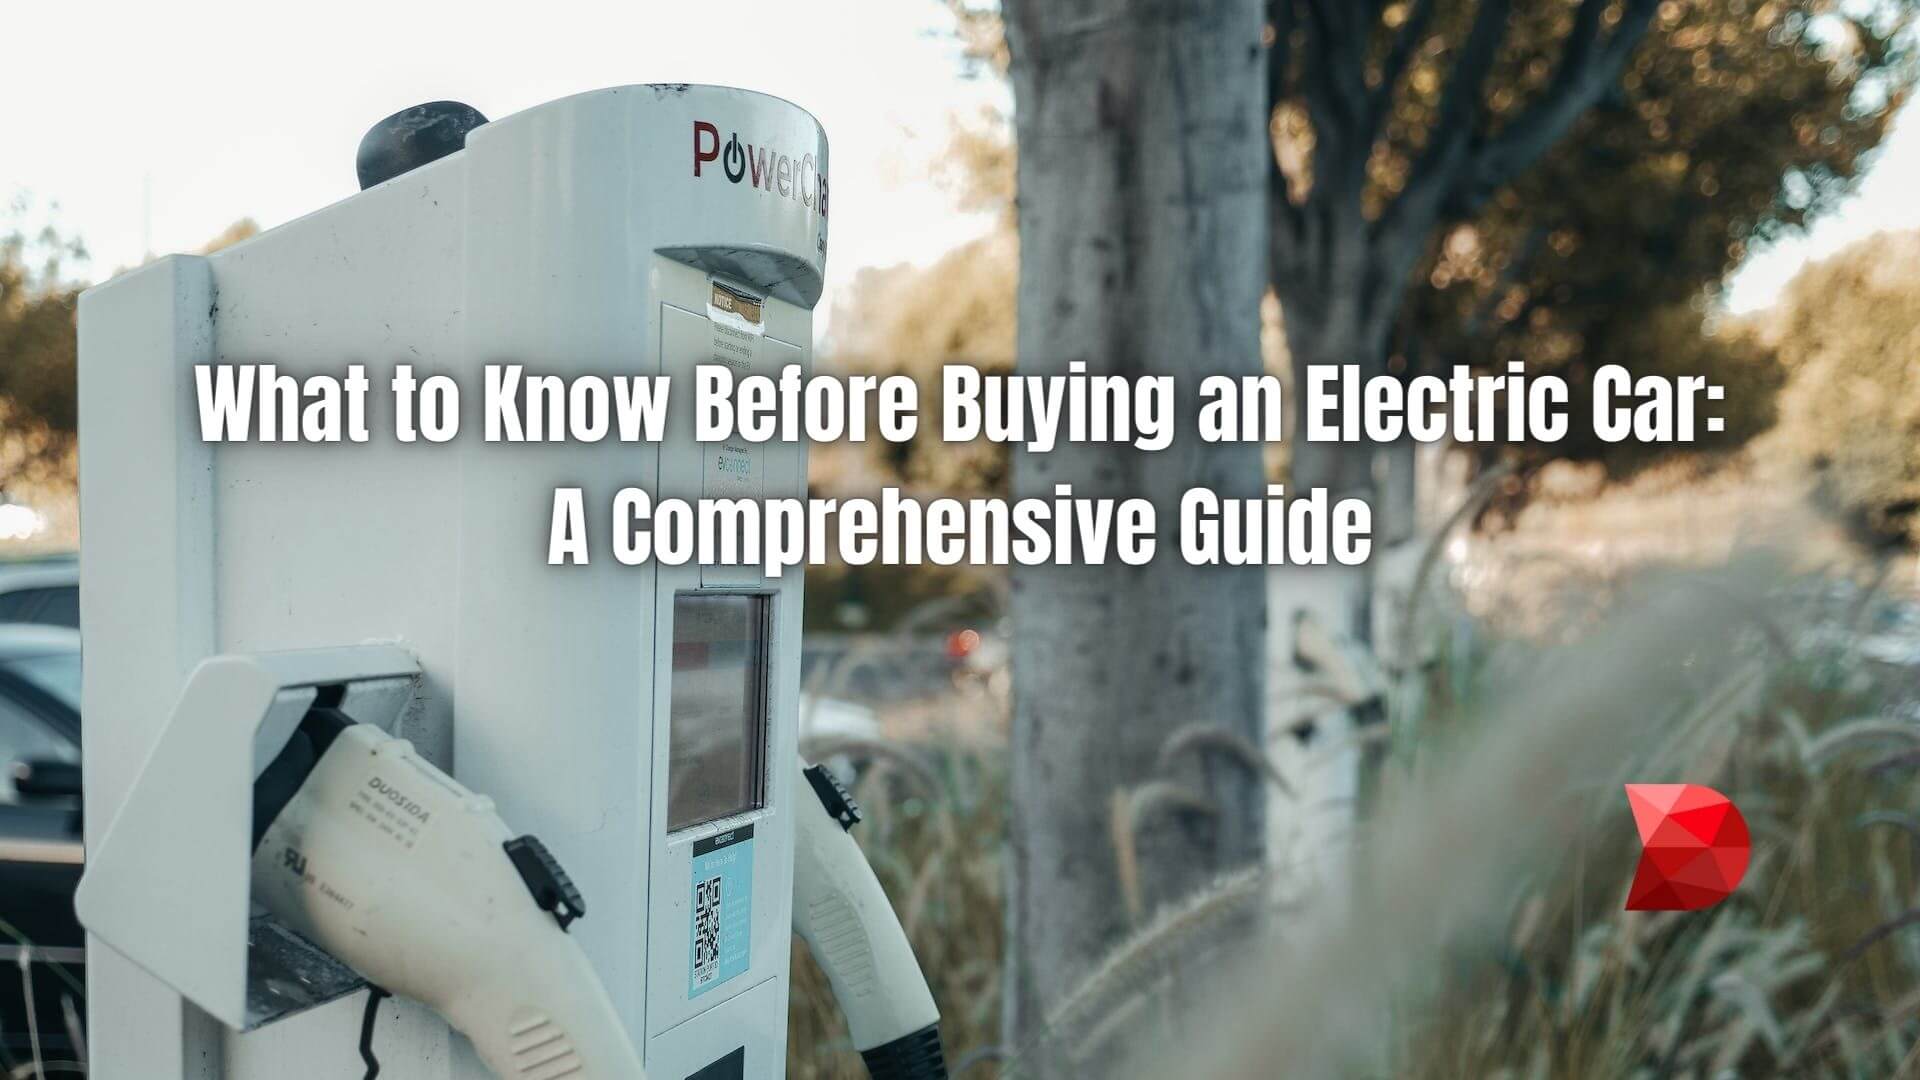 Explore our comprehensive guide to buying an electric car. Click here to learn what you need to know before making your purchase.